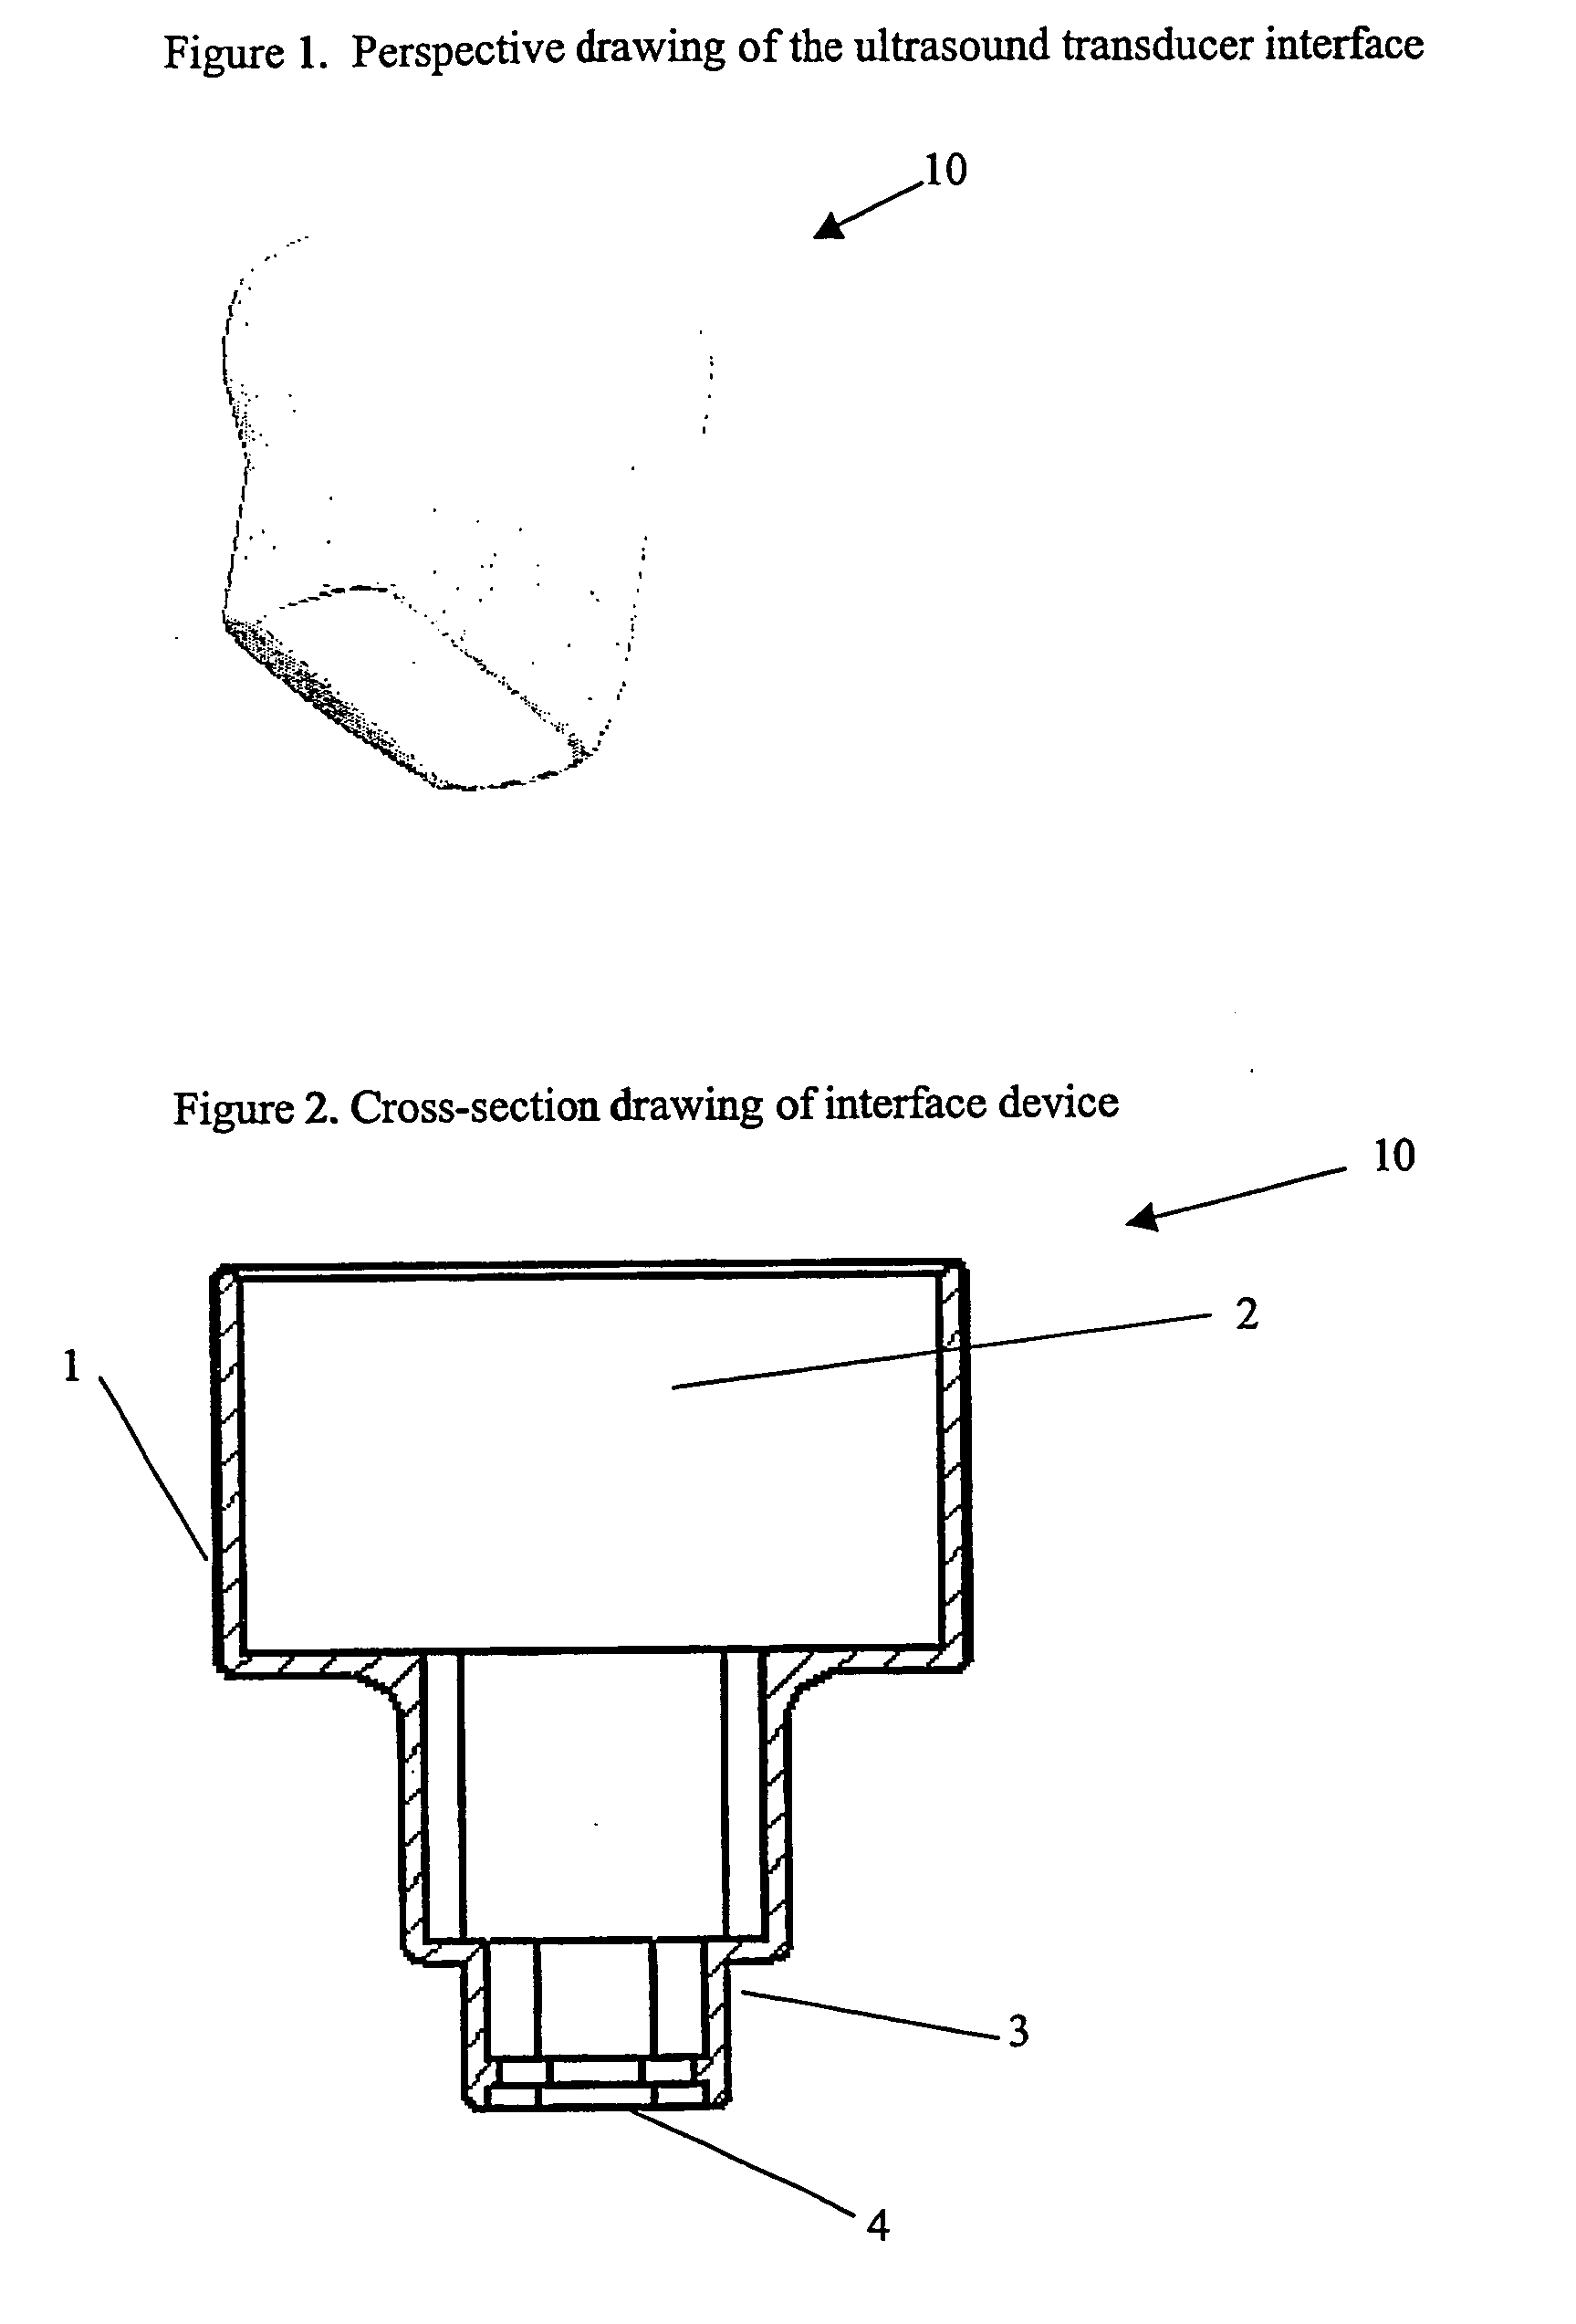 Ultrasound interfacing device for tissue imaging